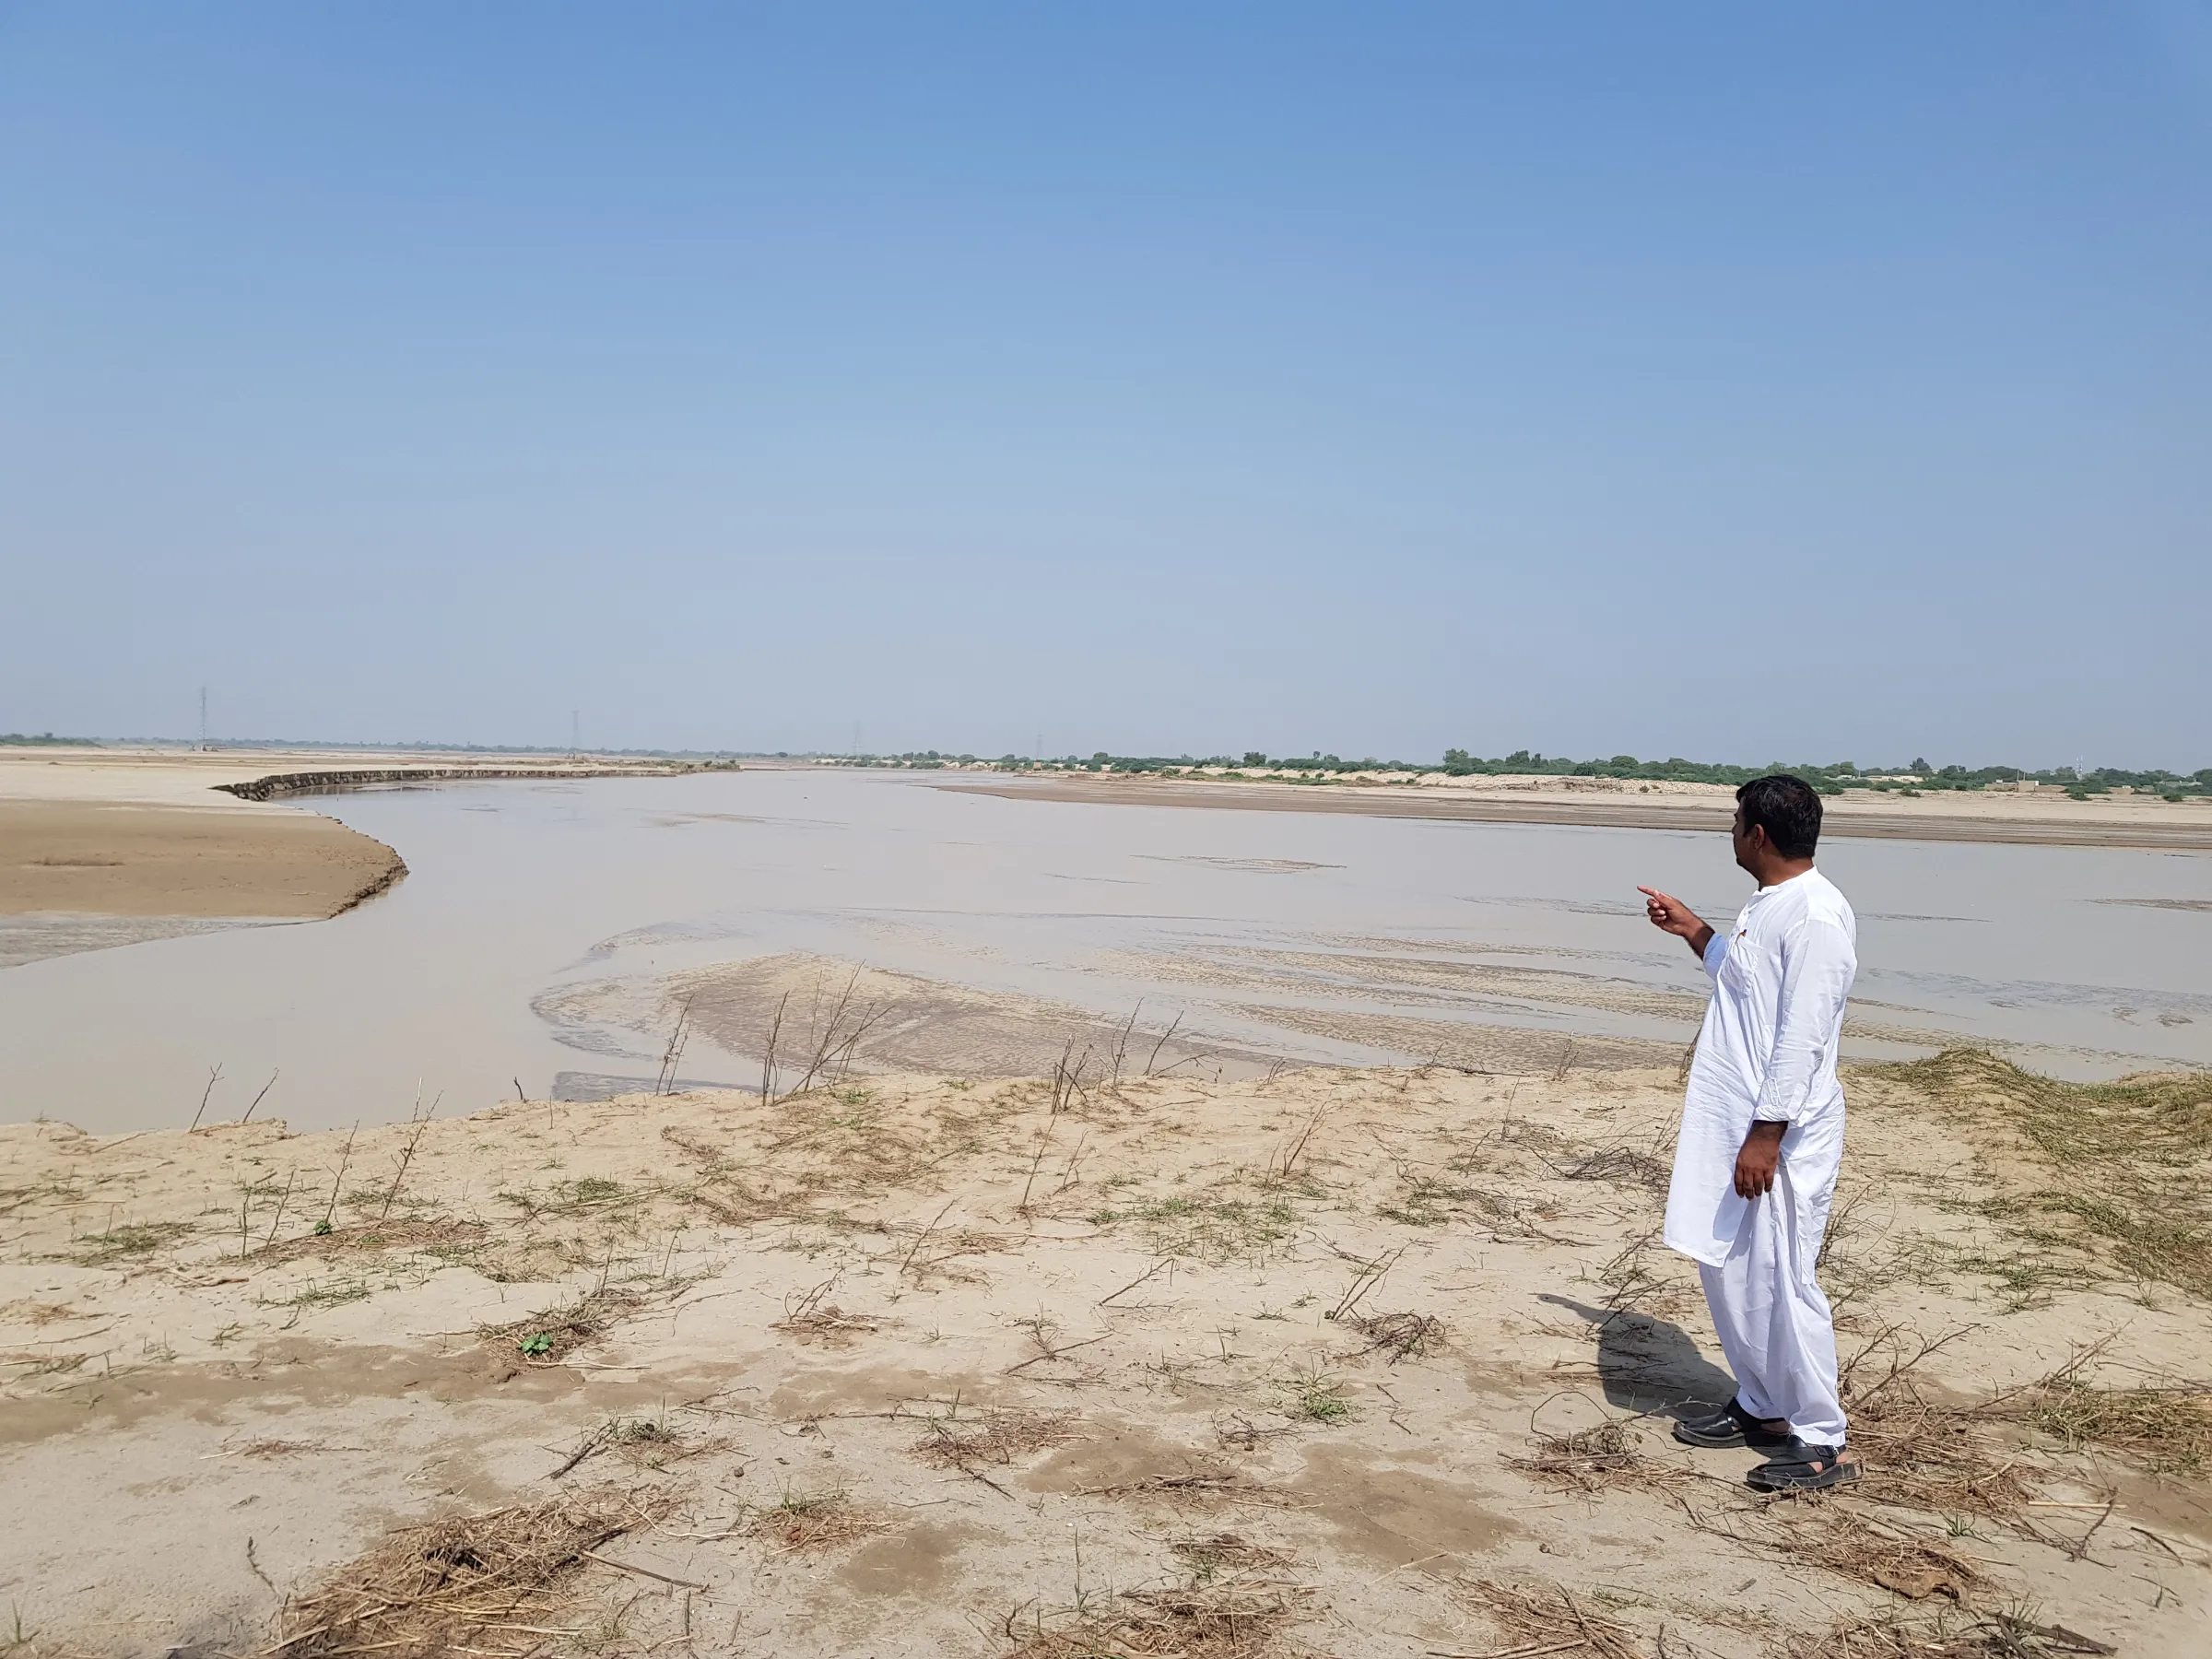 Omar Daraz, a cotton grower, points to the flood water that destroyed his crop in Hasanabad, Pakistan, September 28, 2022. Thomson Reuters Foundation/Waqar Mustafa